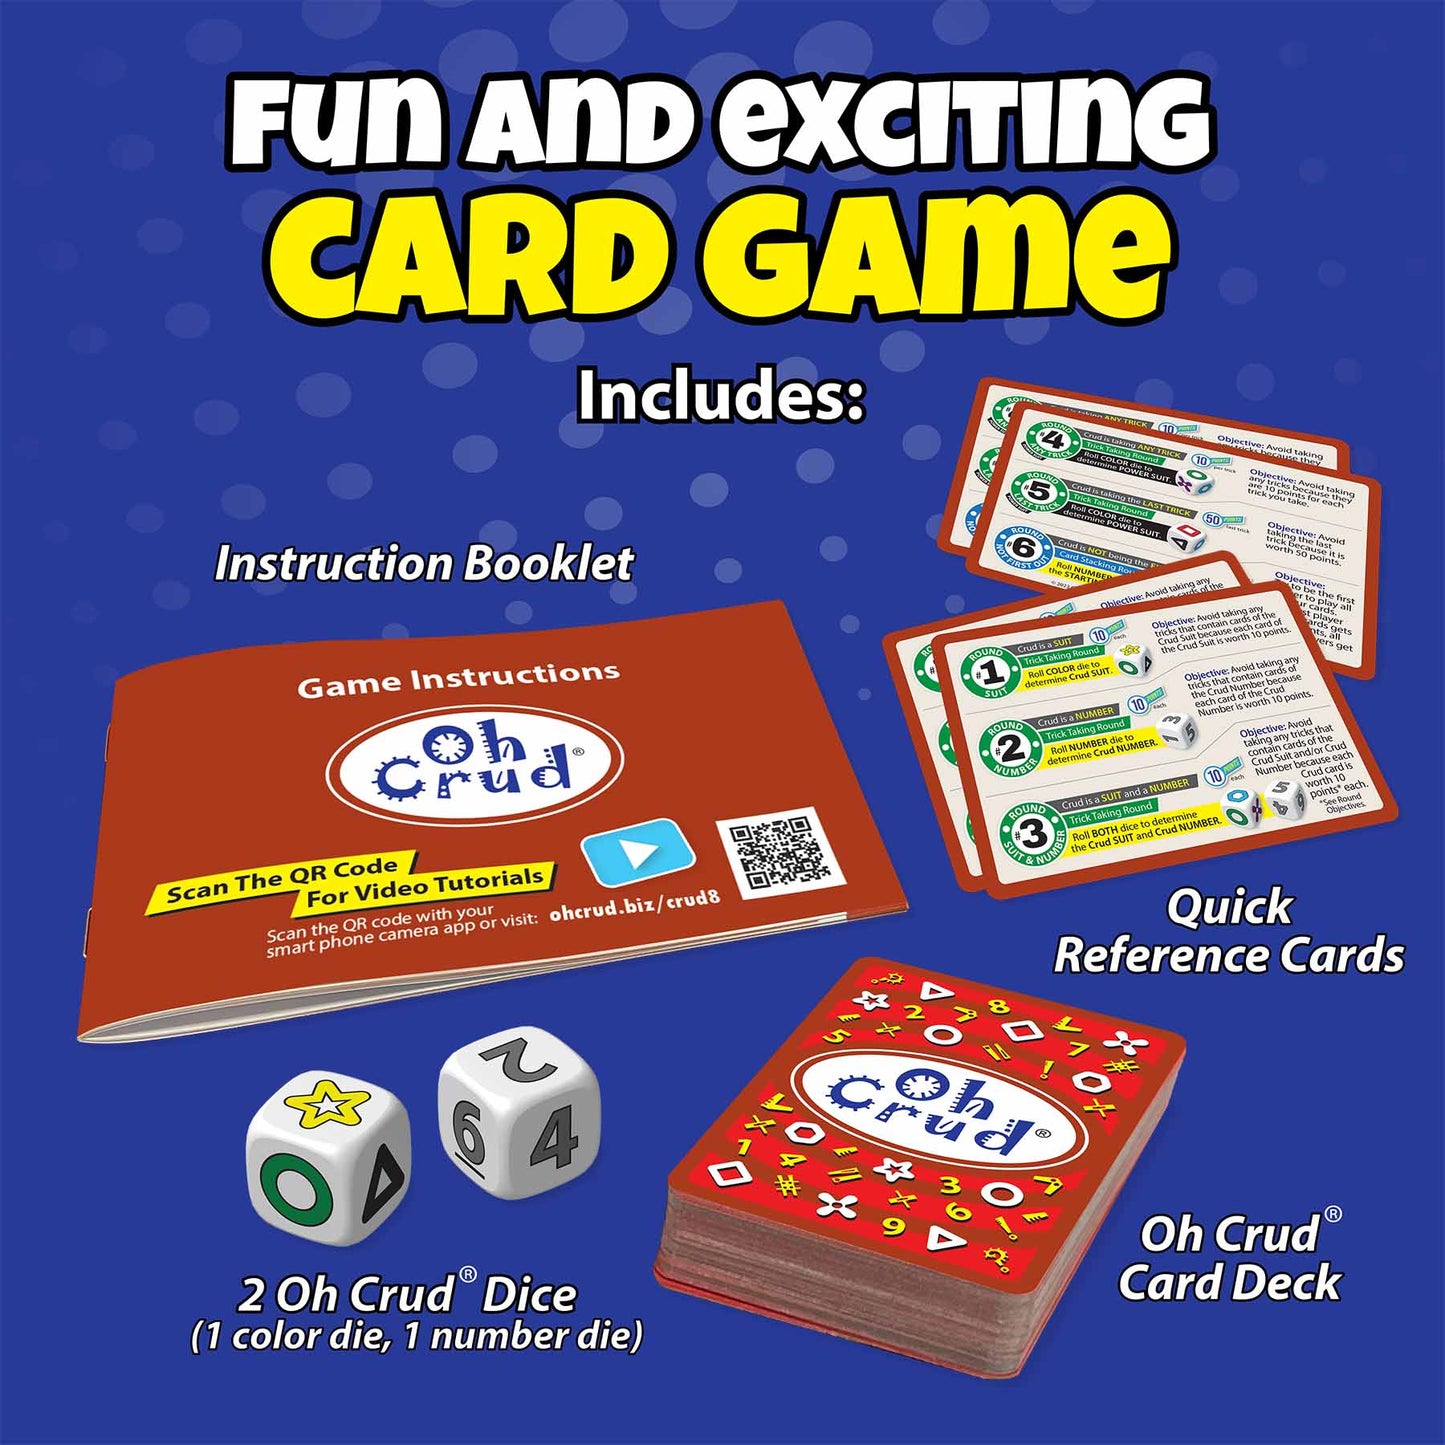 fun and exciting game includes an Oh Crud card deck, 2 oh crud dice, instruction booklet and quick reference cards